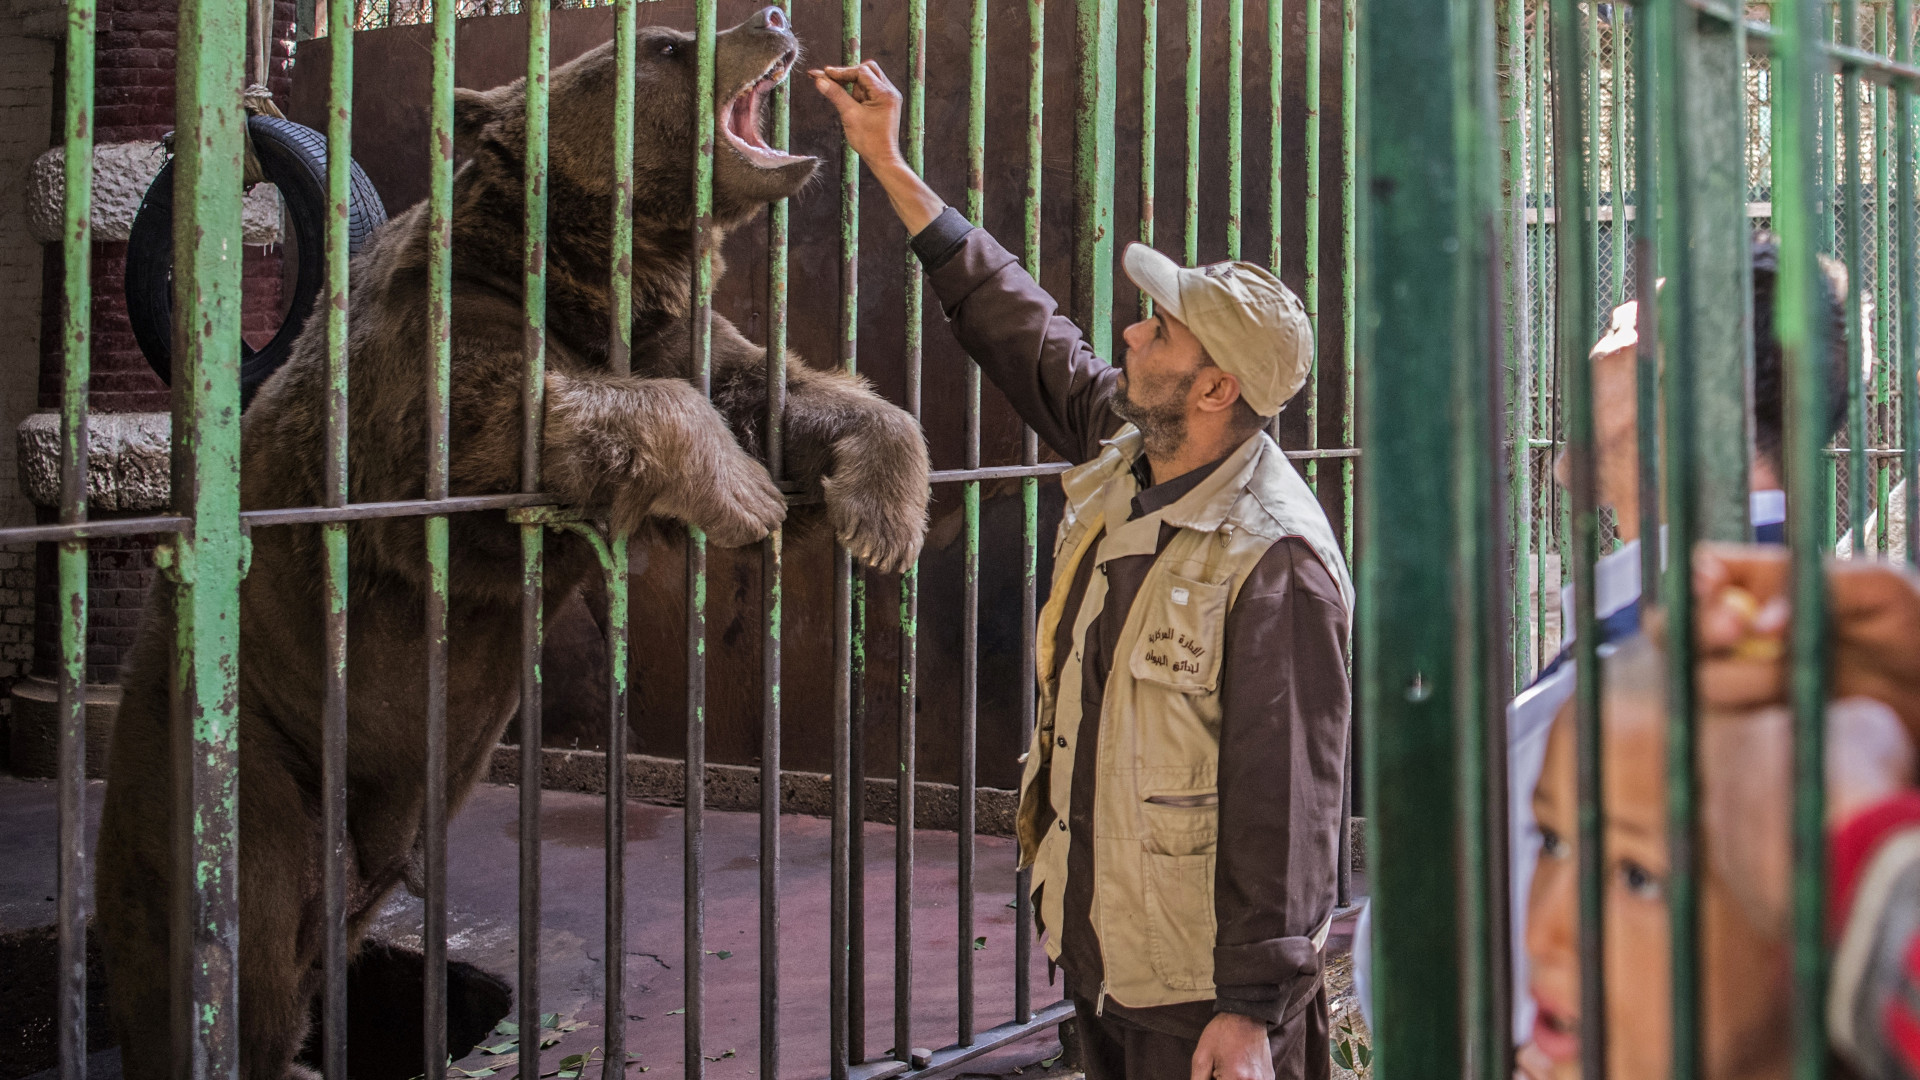 An Egyptian zoo keeper feeds a bear at Giza Zoo in Cairo, on 20 February 2019 (AFP)